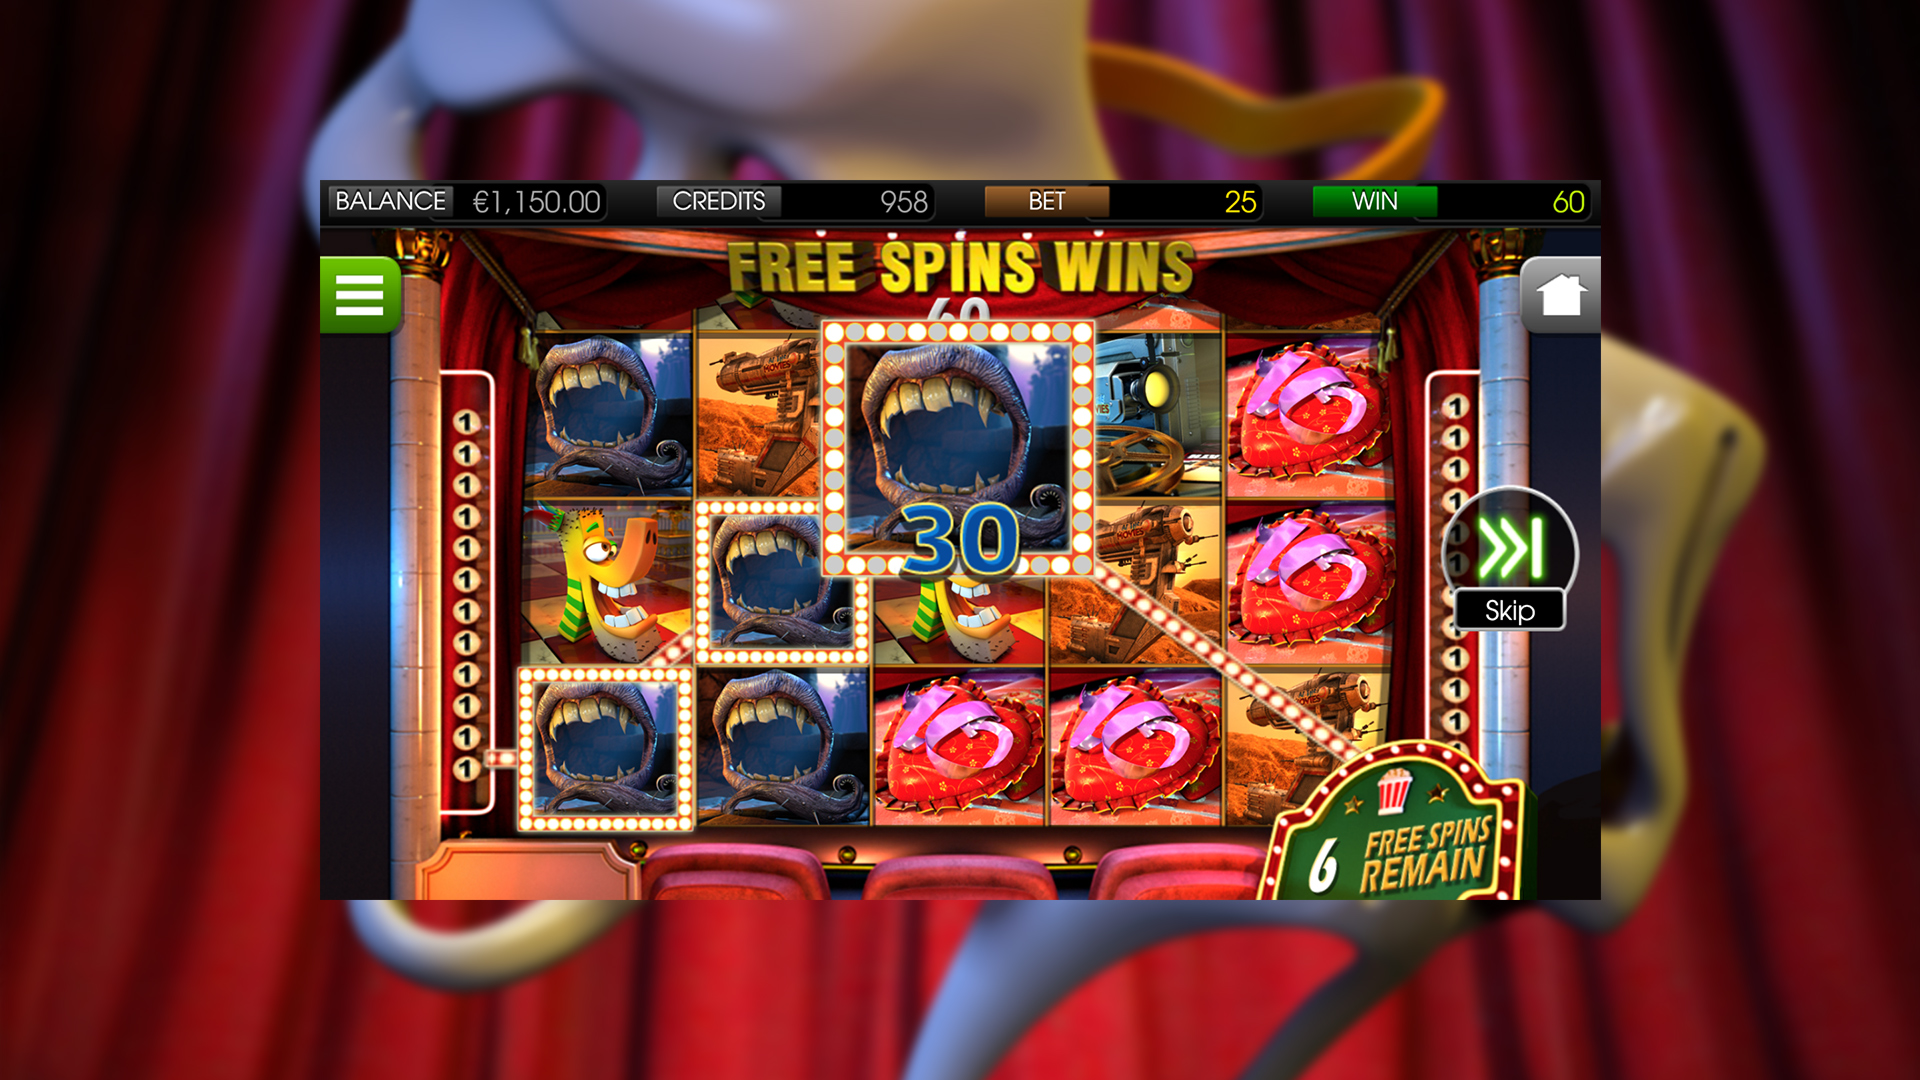 At The Movies - Free Spins